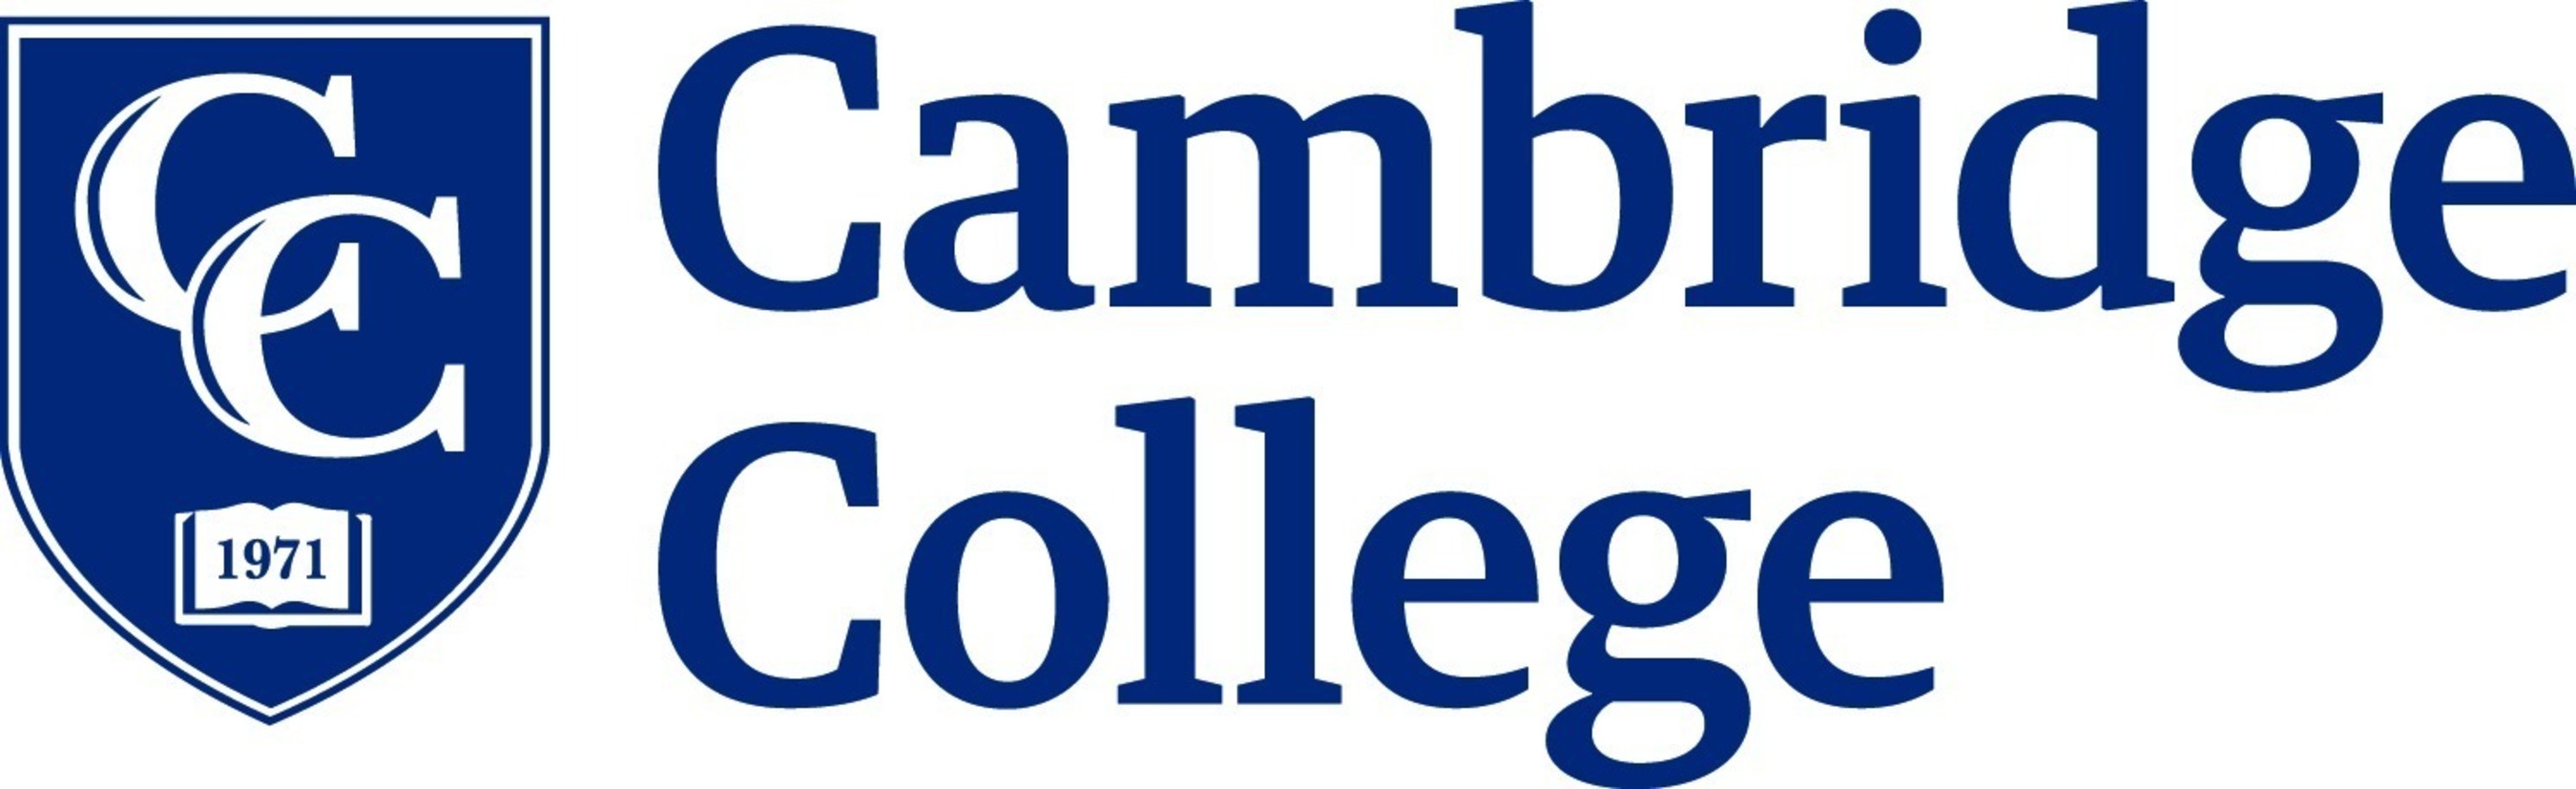 Cambridge College is dedicated to providing academically excellent, time-efficient, and cost-effective higher education for a diverse population of adult learners for whom those opportunities may have been limited or denied. Founded in 1971, Cambridge College is a private non-profit institution of higher education accredited by the New England Association of Schools and Colleges Commission on Institutions of Higher Education, (NEASC CIHE). Visit us online at www.cambridgecollege.edu and follow us at @CambridgeCollg.  (PRNewsFoto/Cambridge College)